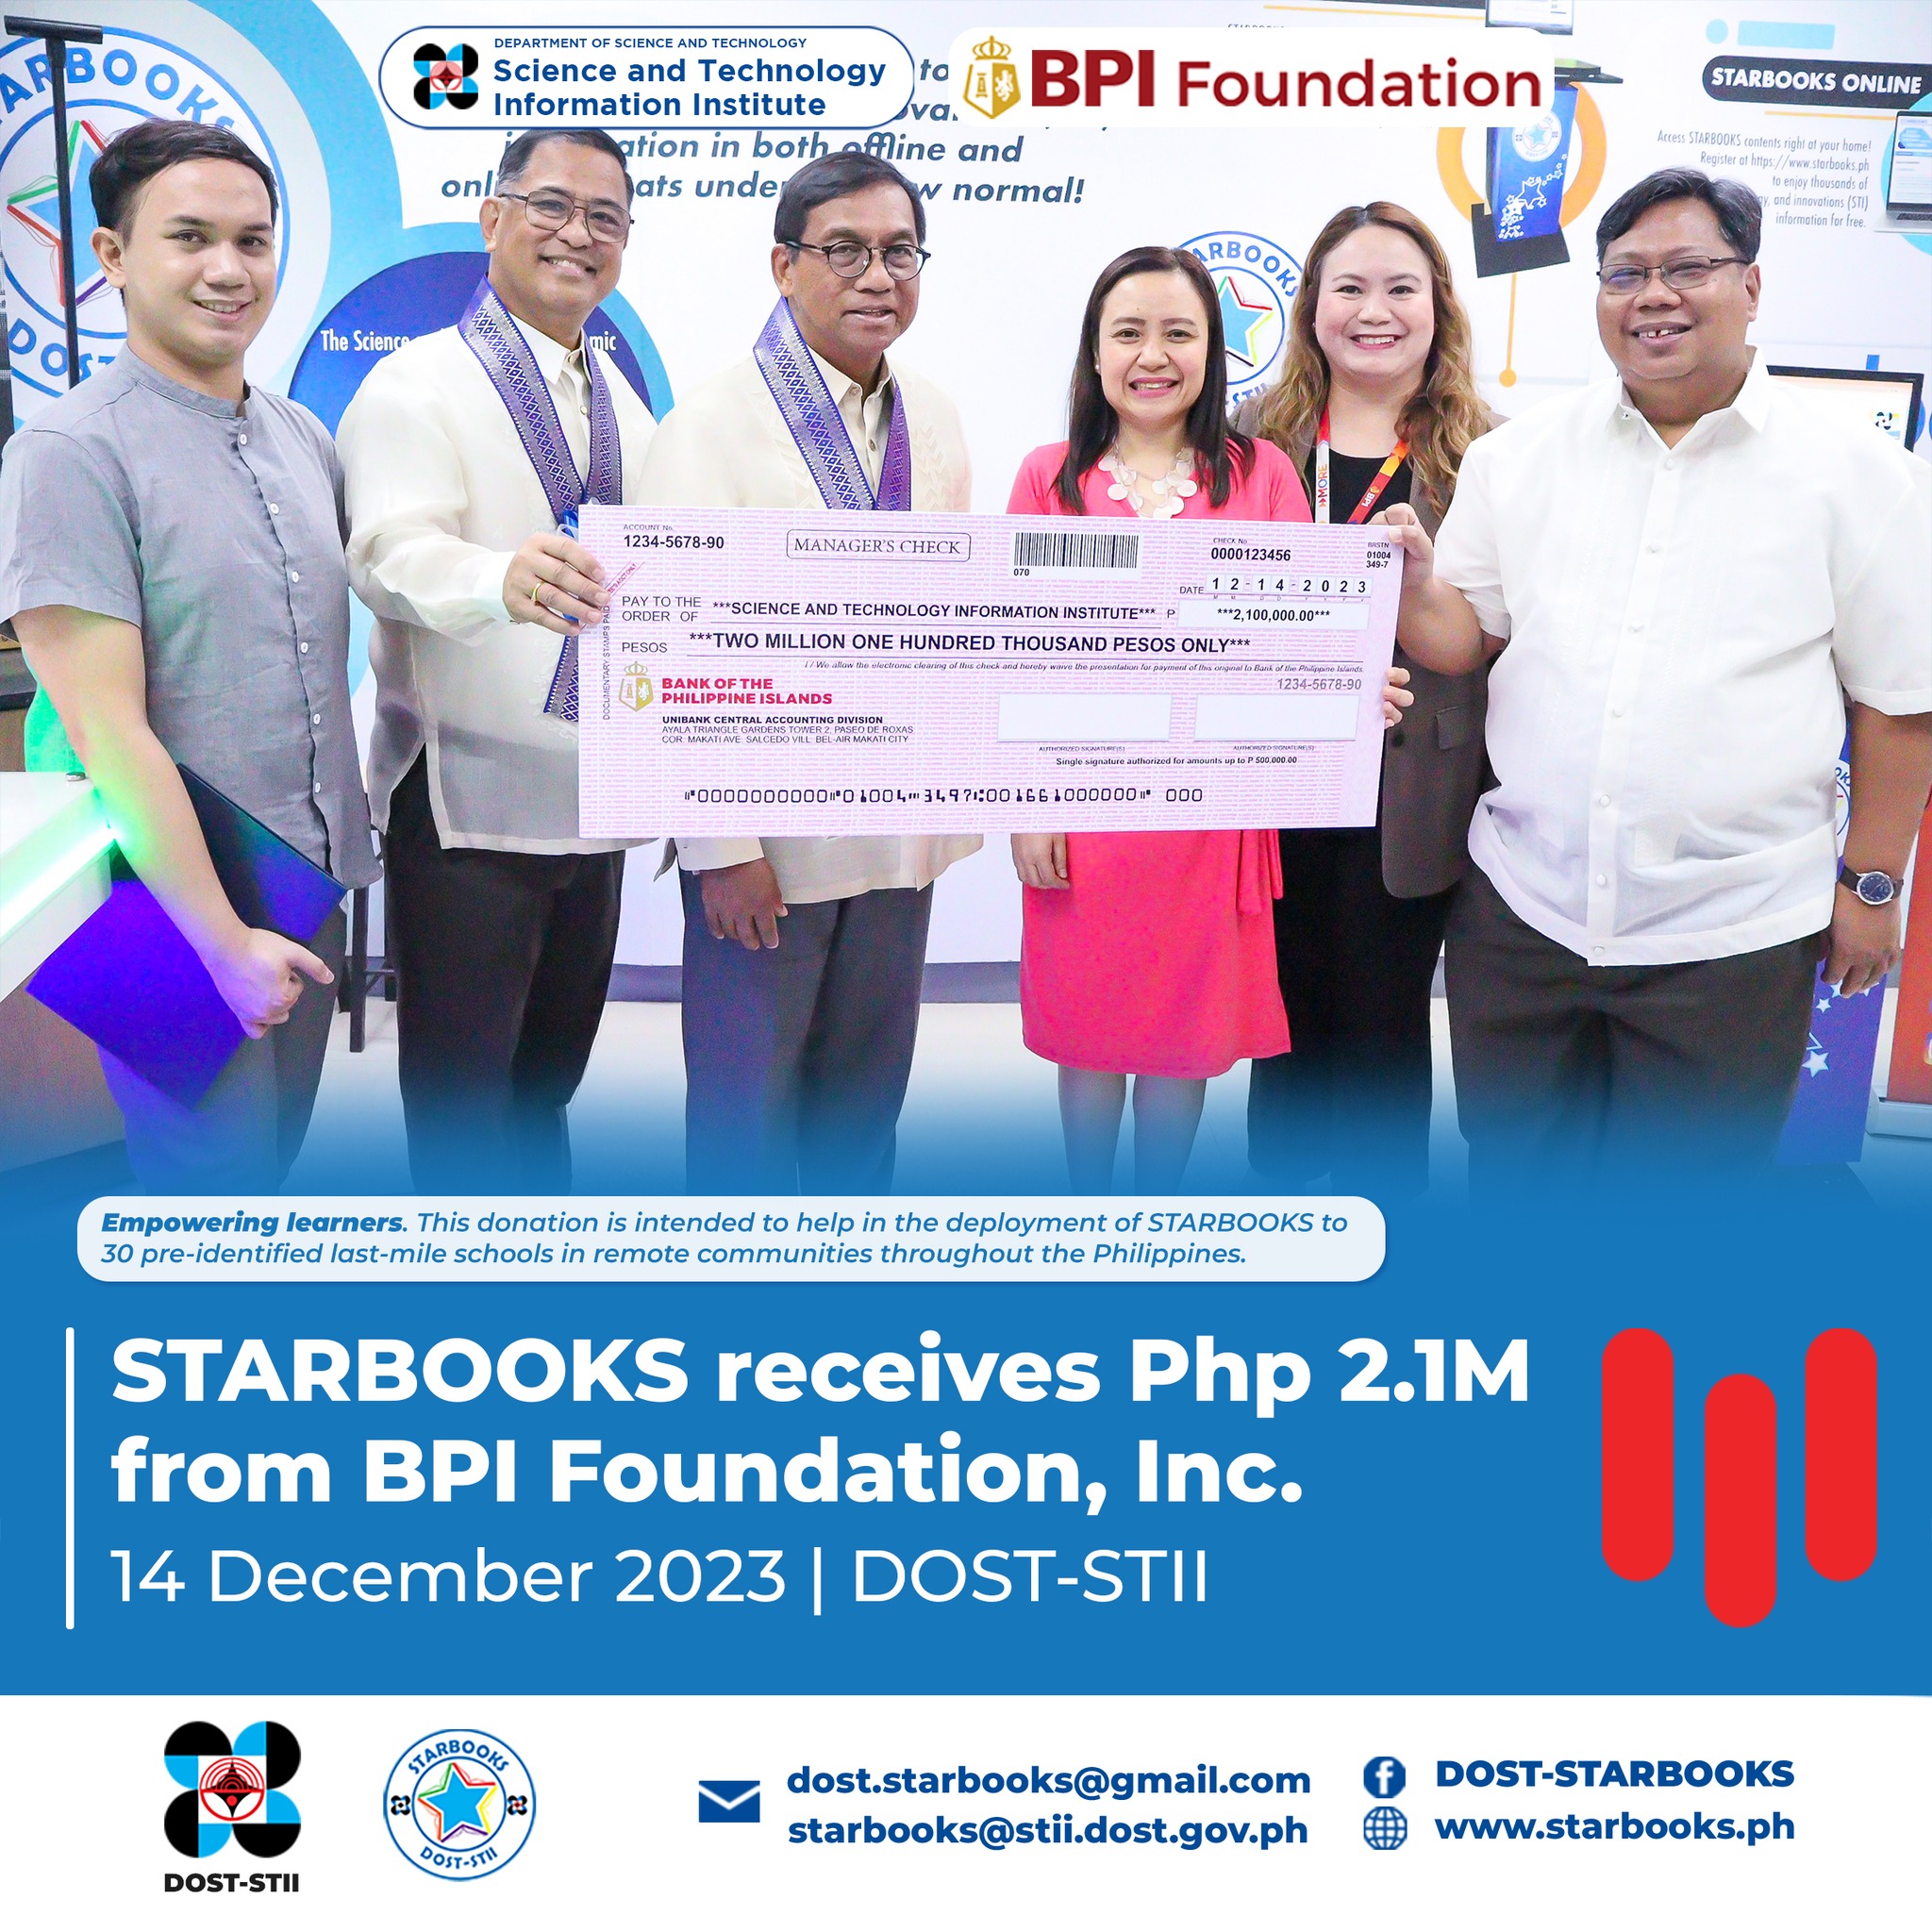 starbooks received 2.1m from bpifi